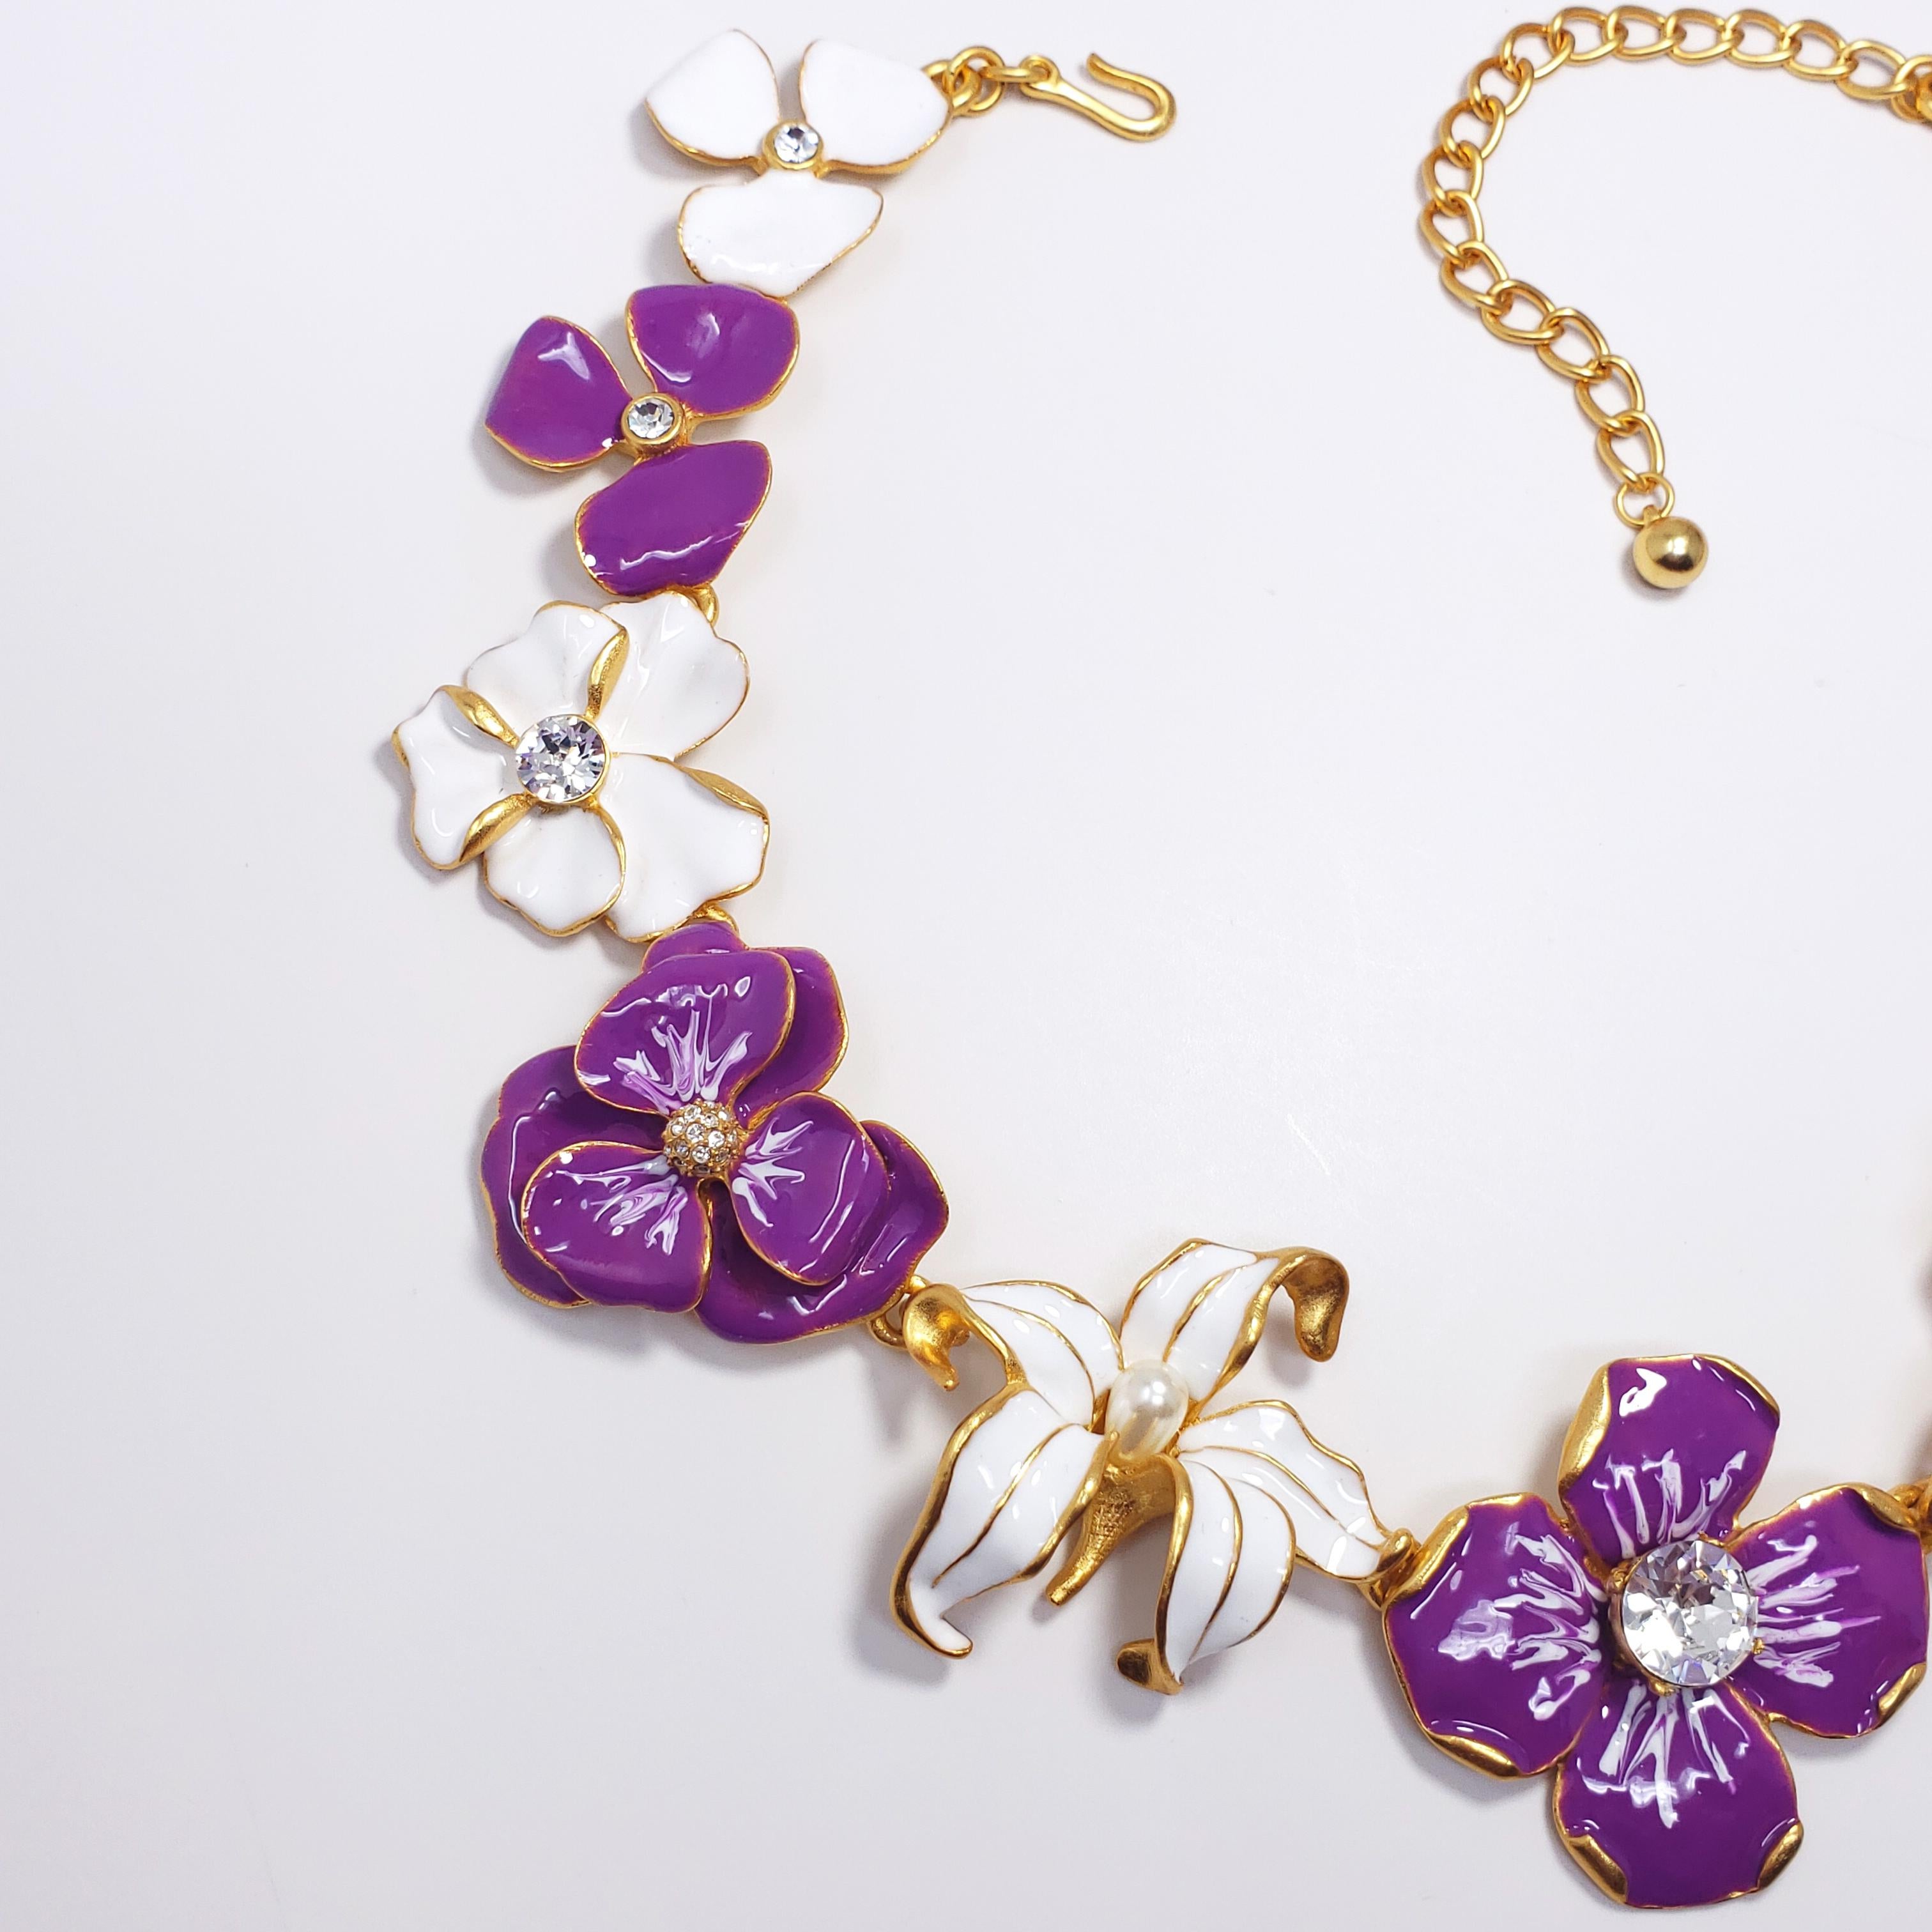 This textured 22K gold-plated metal features an assortment of linked white and purple enameled flowers, accented with crystals and faux pearls. By Kenneth Jay Lane, made in USA.

Weight: 119 g
Hallmarks: Kenneth © Lane
Flower sizes from 2.6 to 4.1